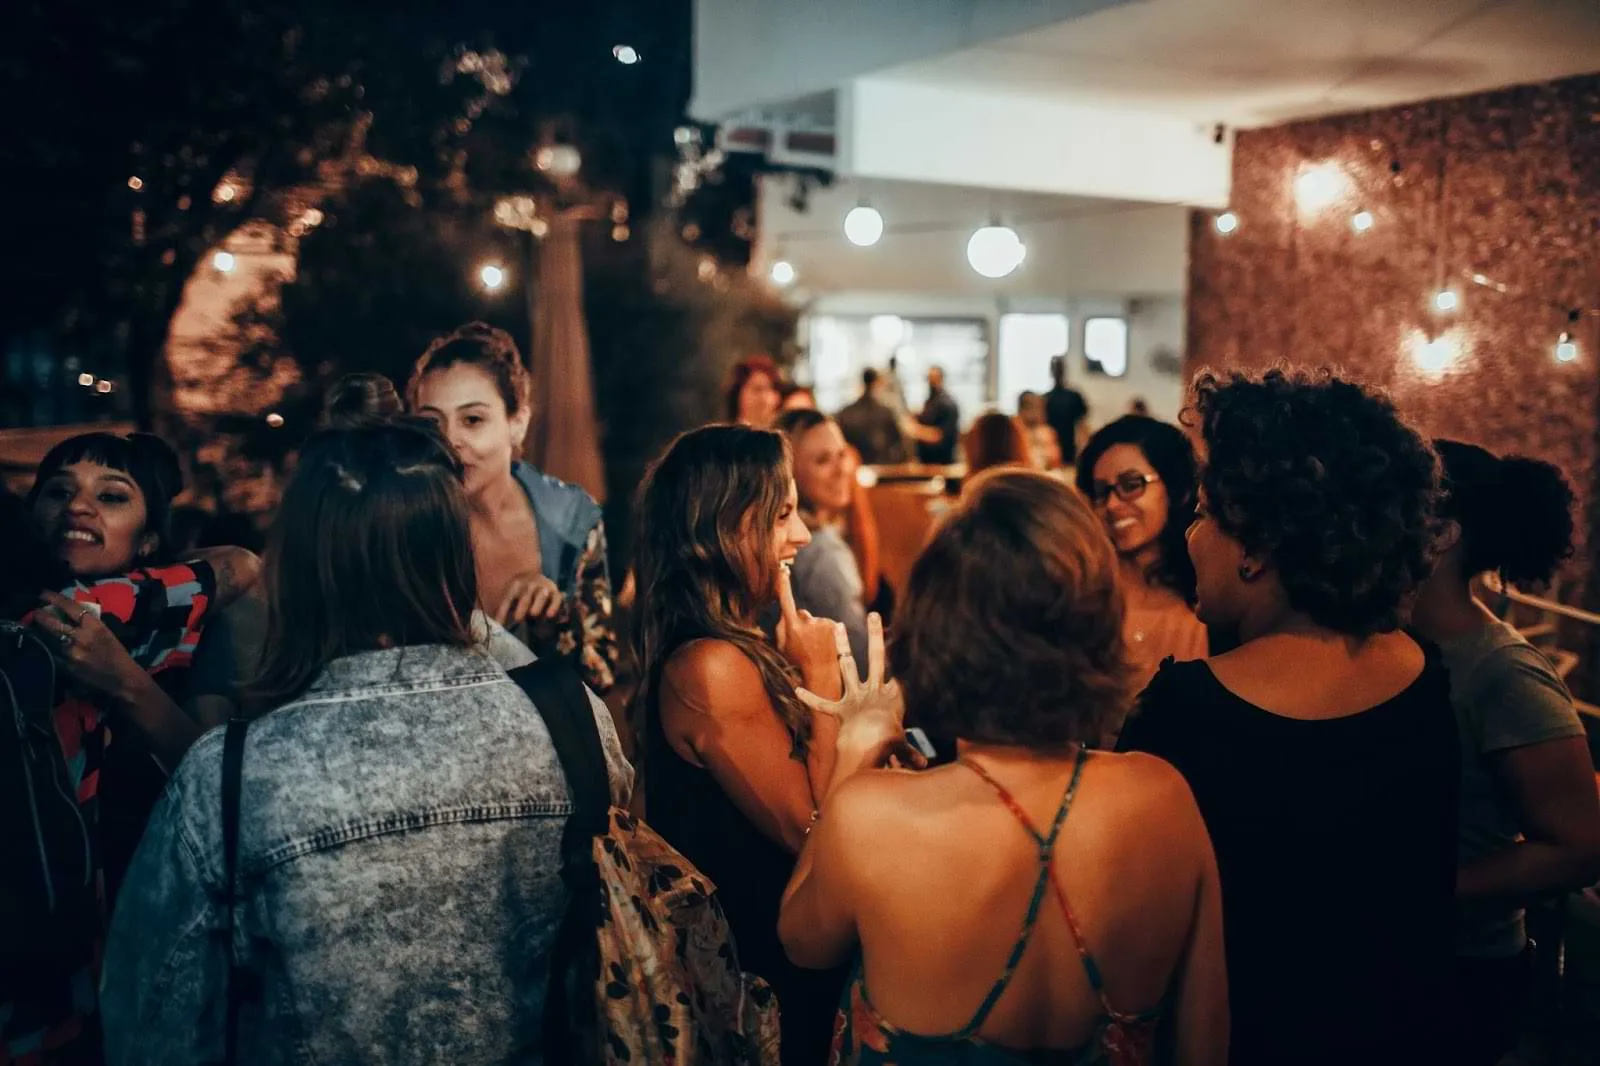 A group of women engaging in conversation at an evening social gathering outdoors